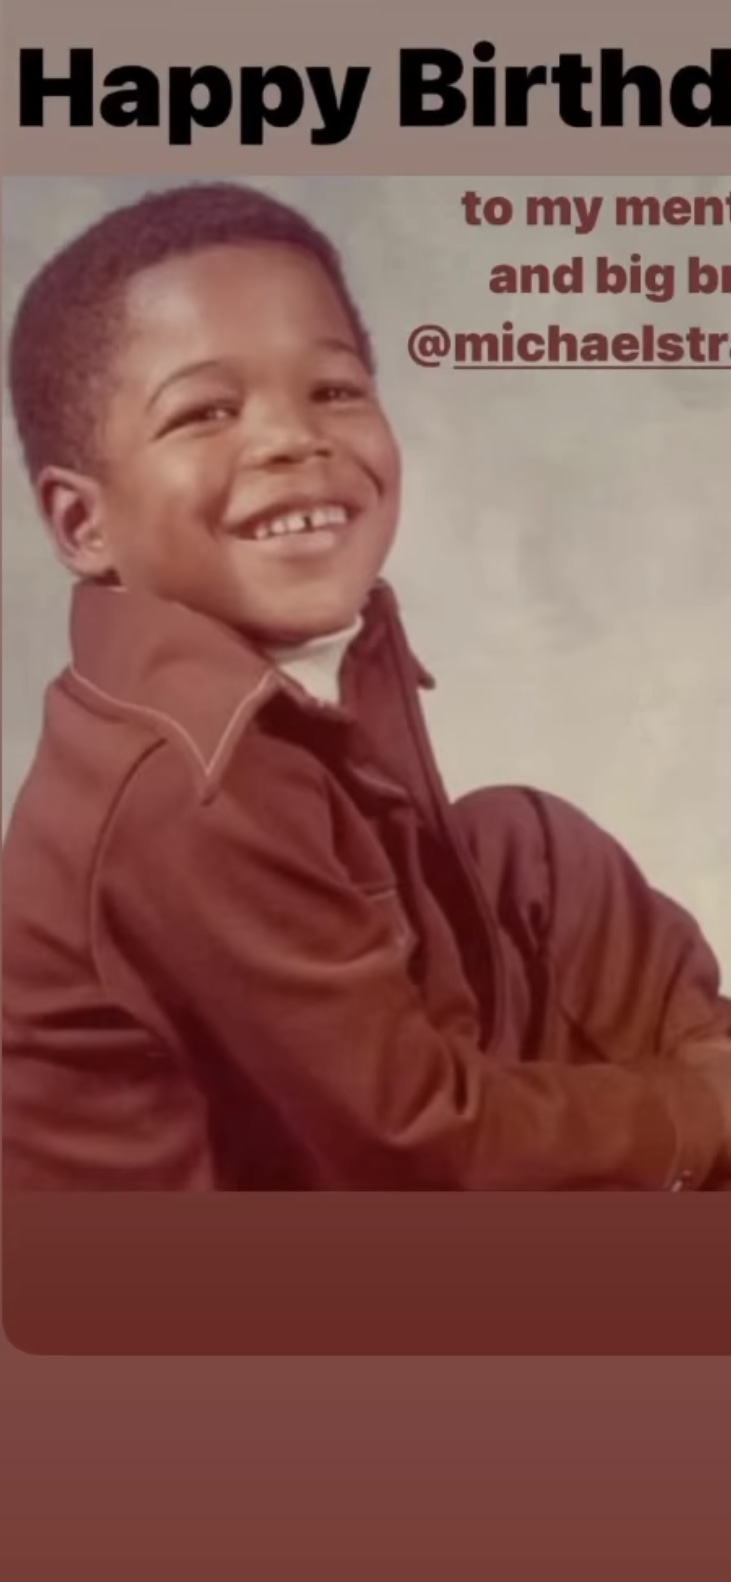 Michael Strahan in a childhood photo